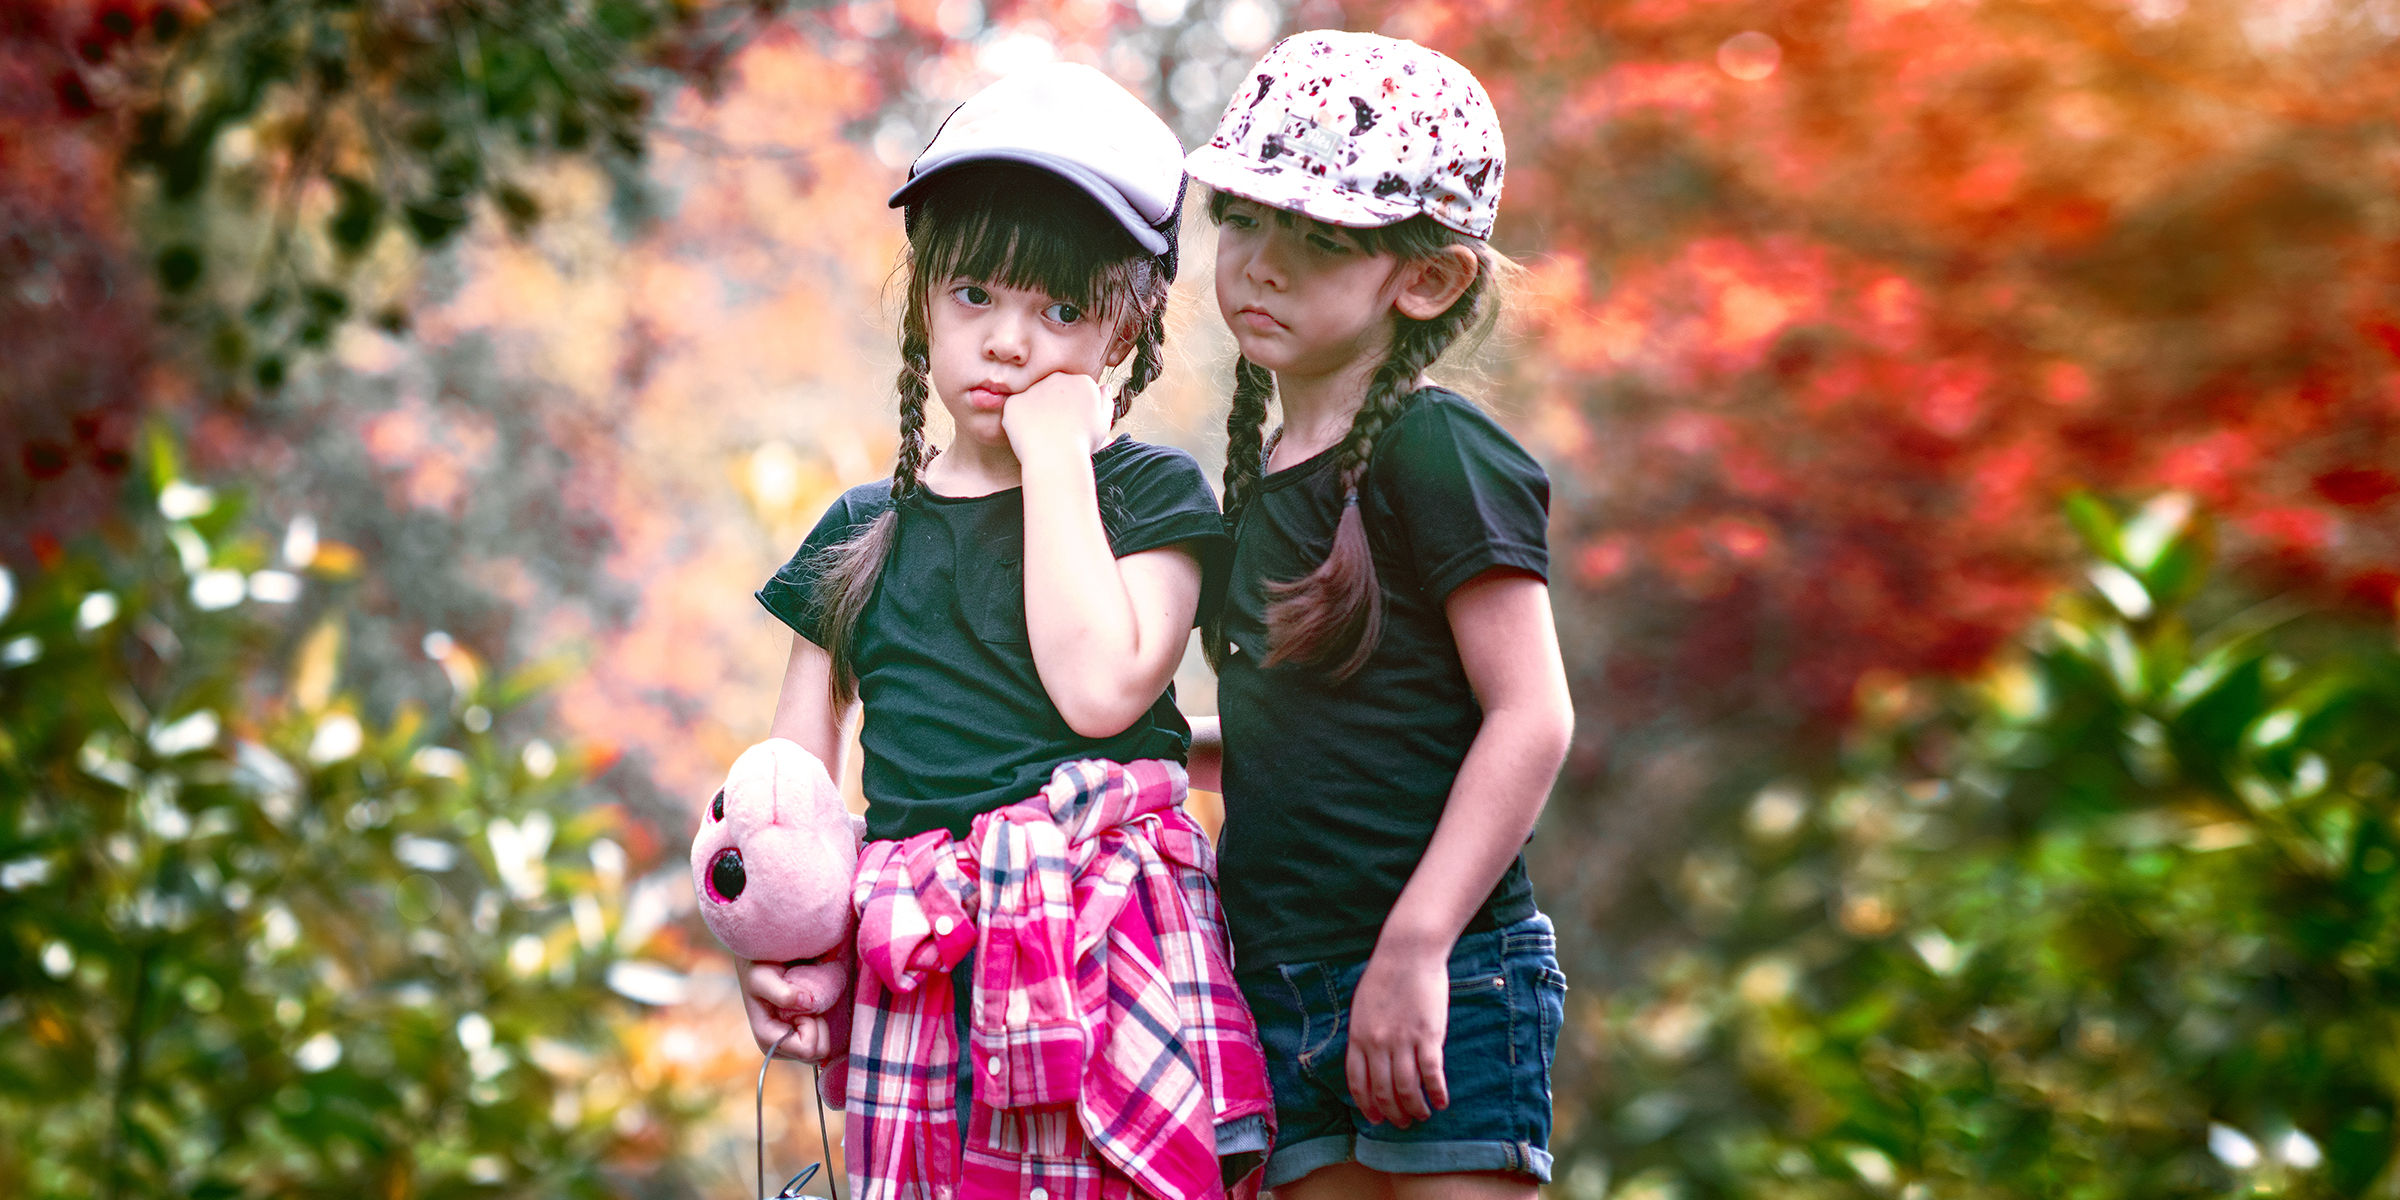 Two girls in a park | Source: Shutterstock